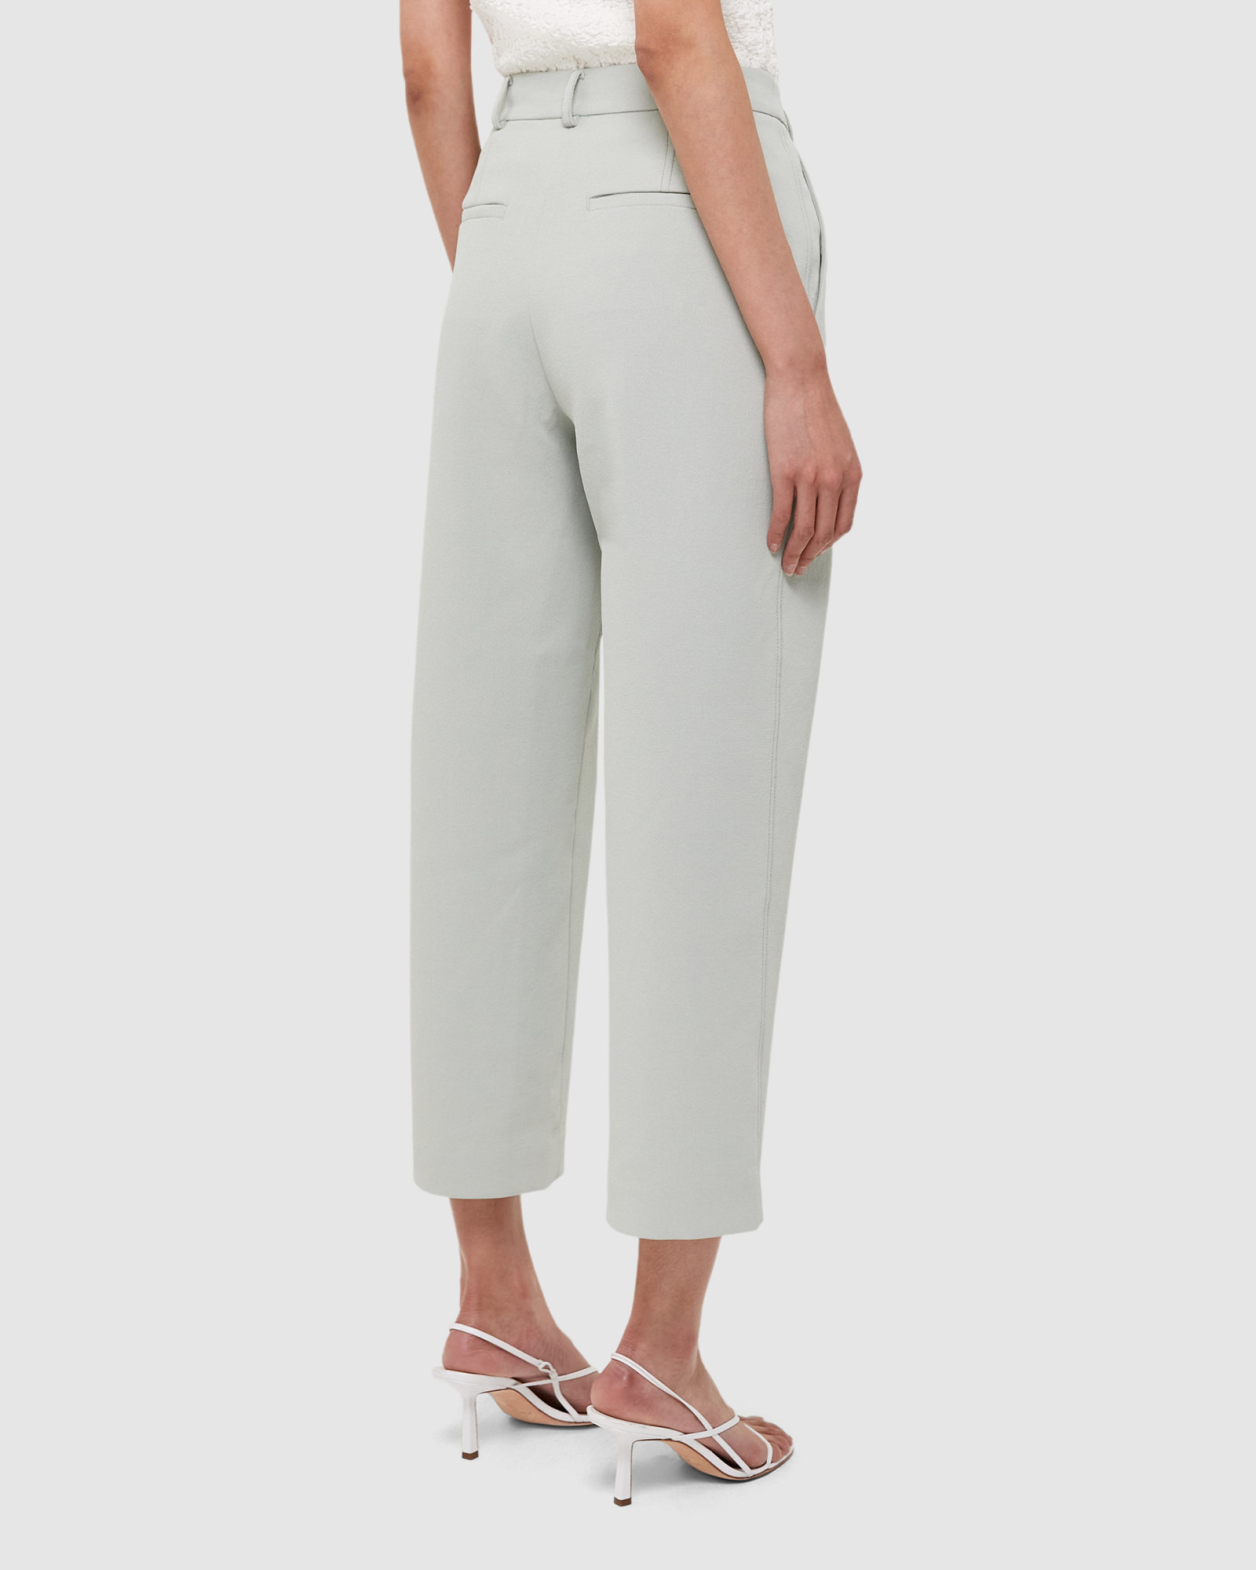 Dharma Tuck Front Culotte in MINT